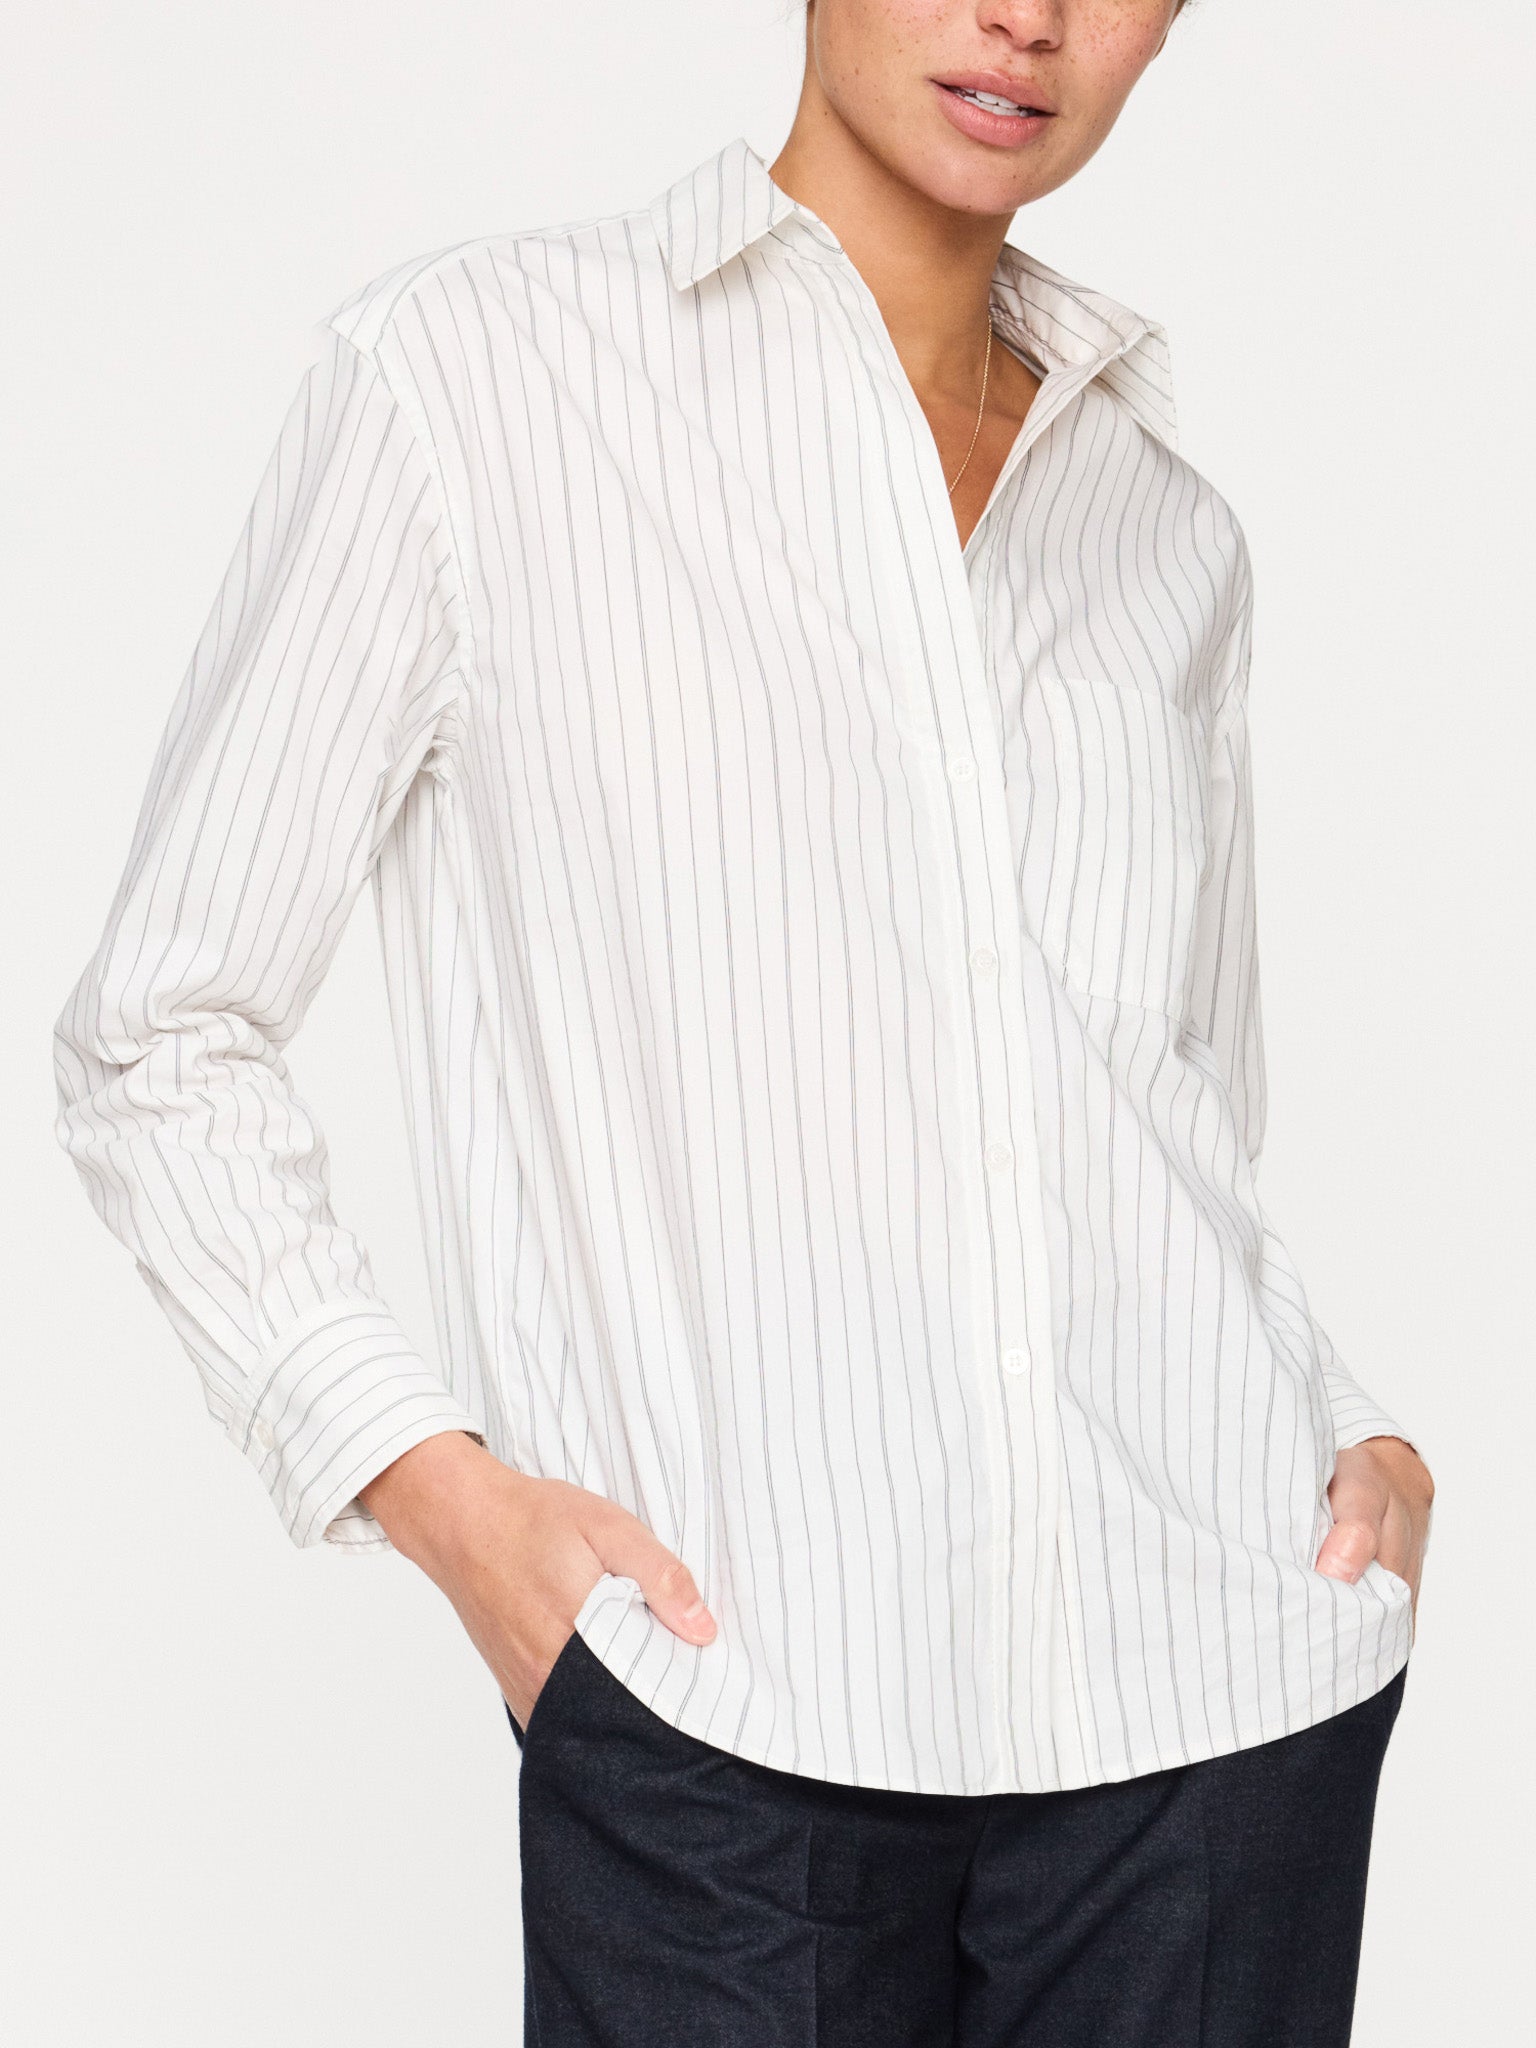 Everyday button up white stripe shirt front view